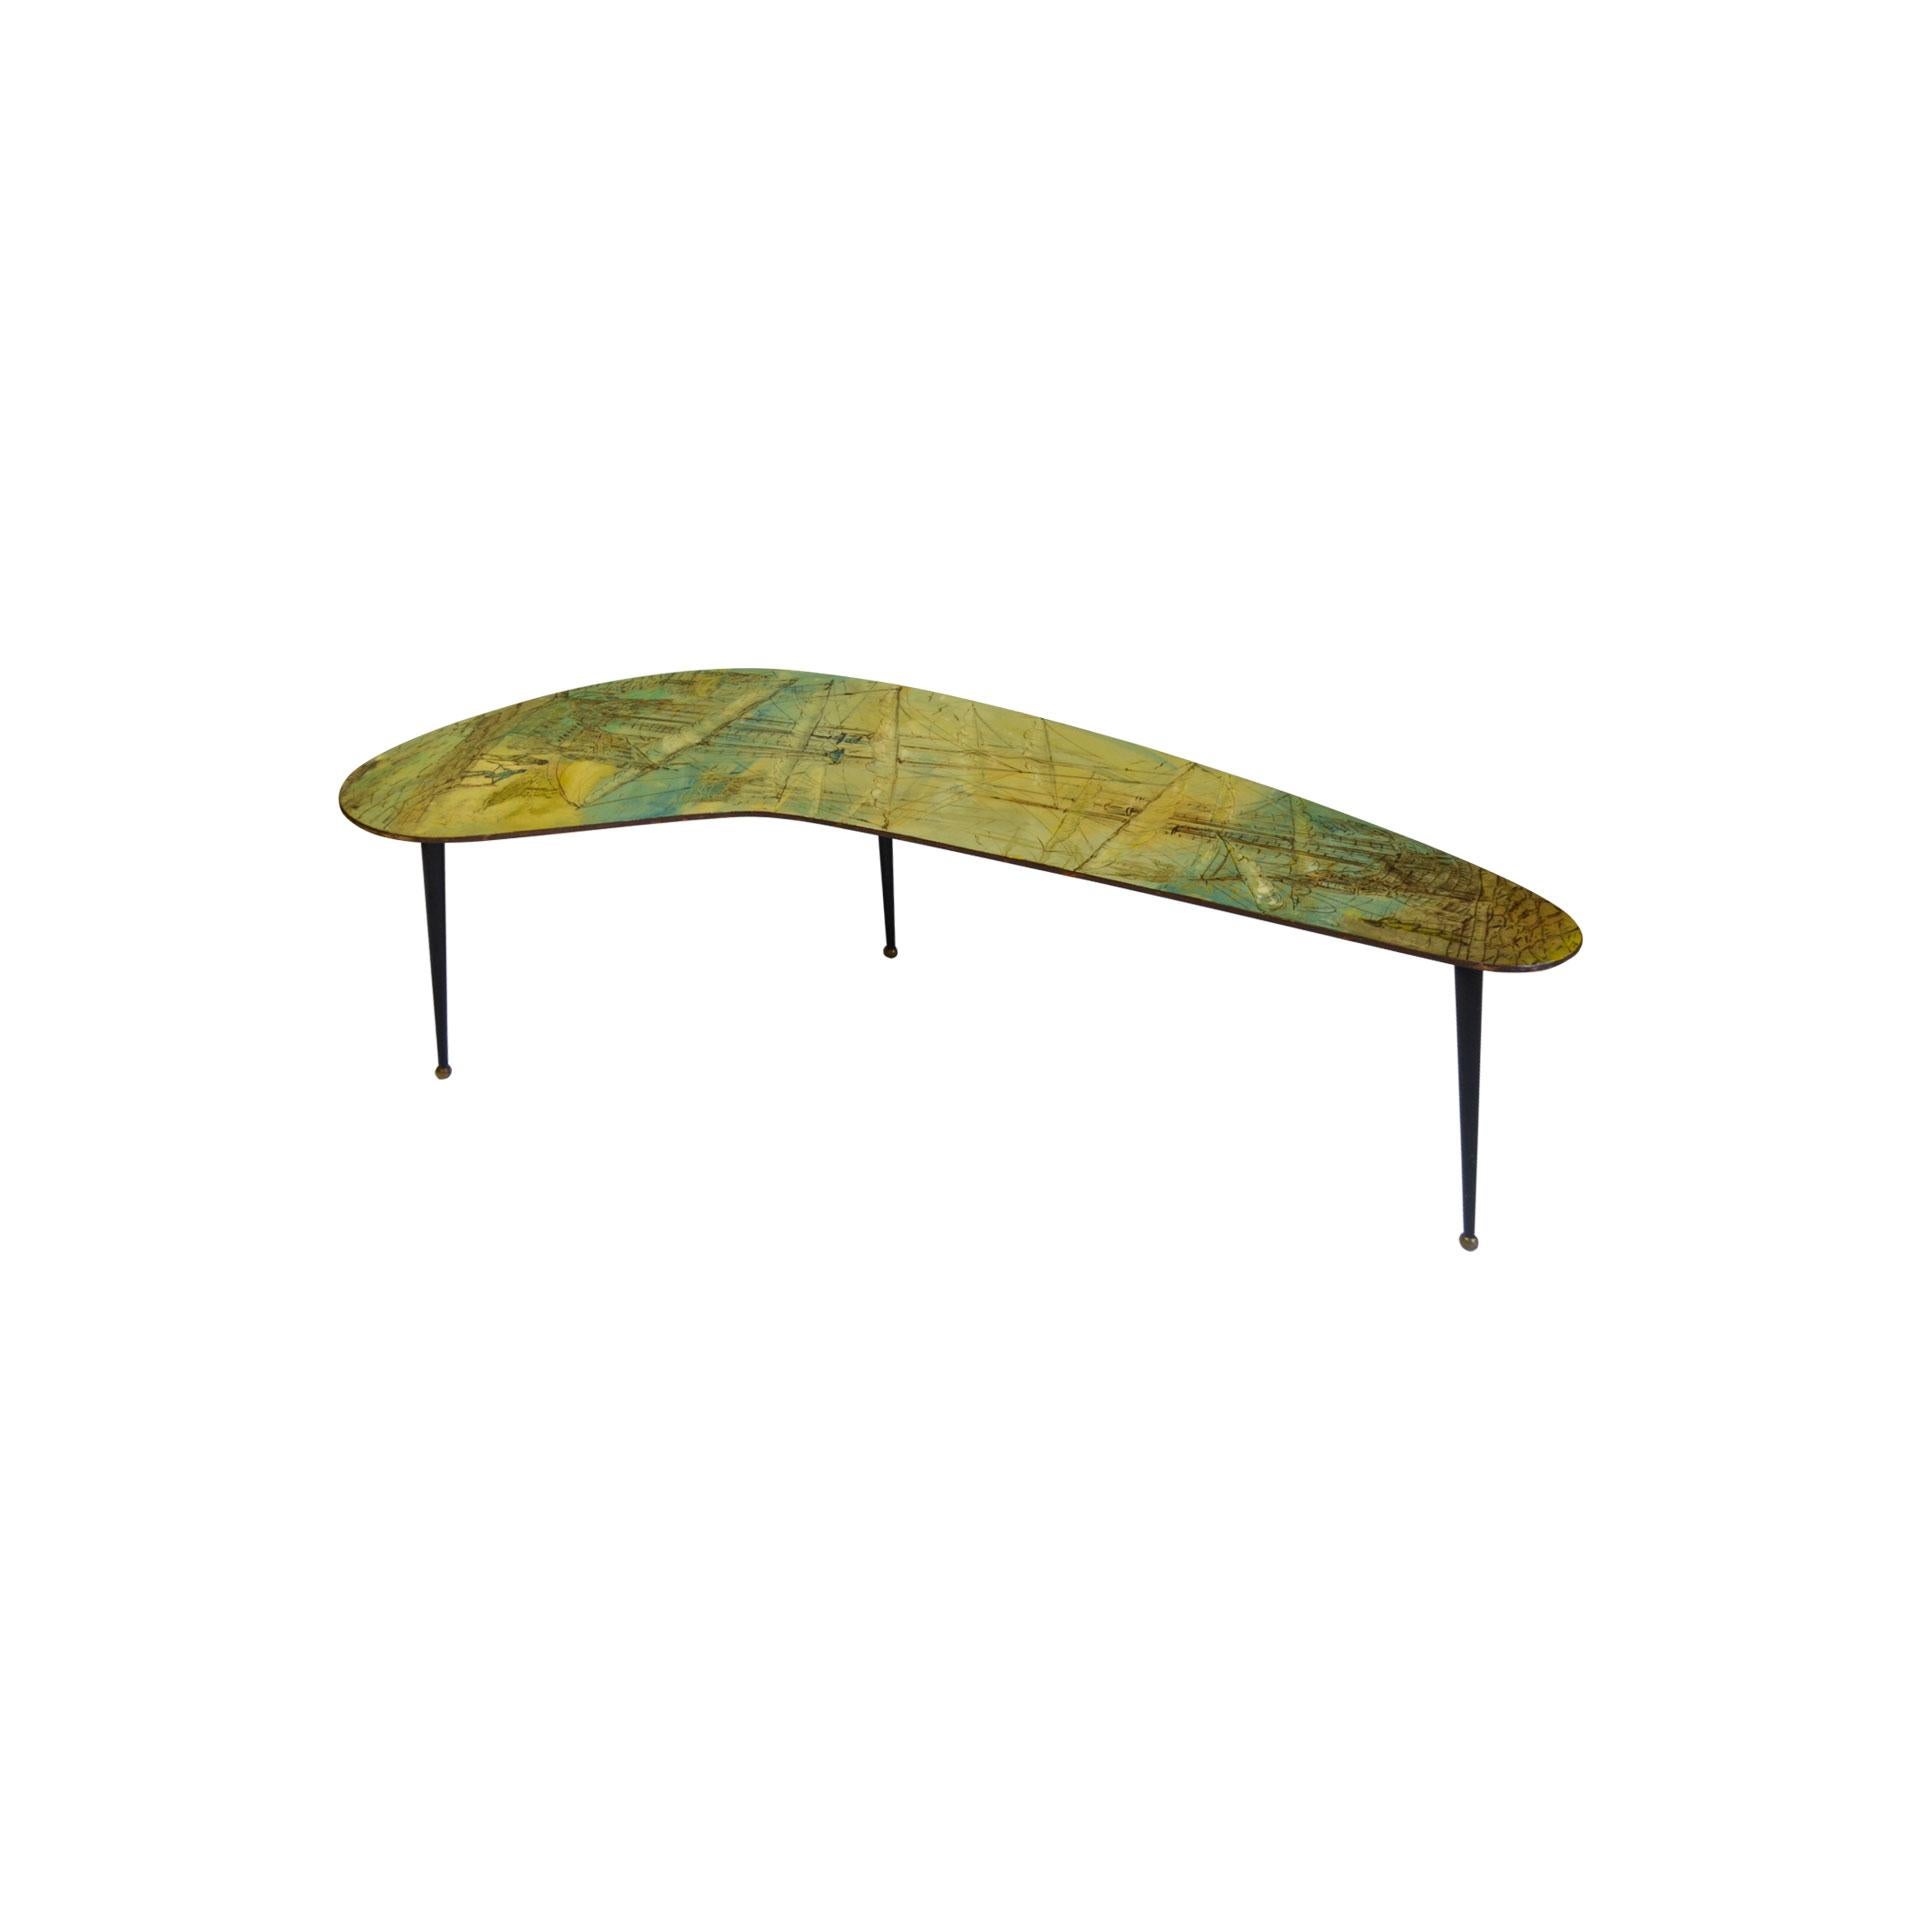 Low table or coffee table designed by the Art Group Decalage in 1956. The group was made of De Cavero, Aloisi and Girardi, 3 young italian artists that conceived their group of work as sperimental and at the same time artisanal. From their first